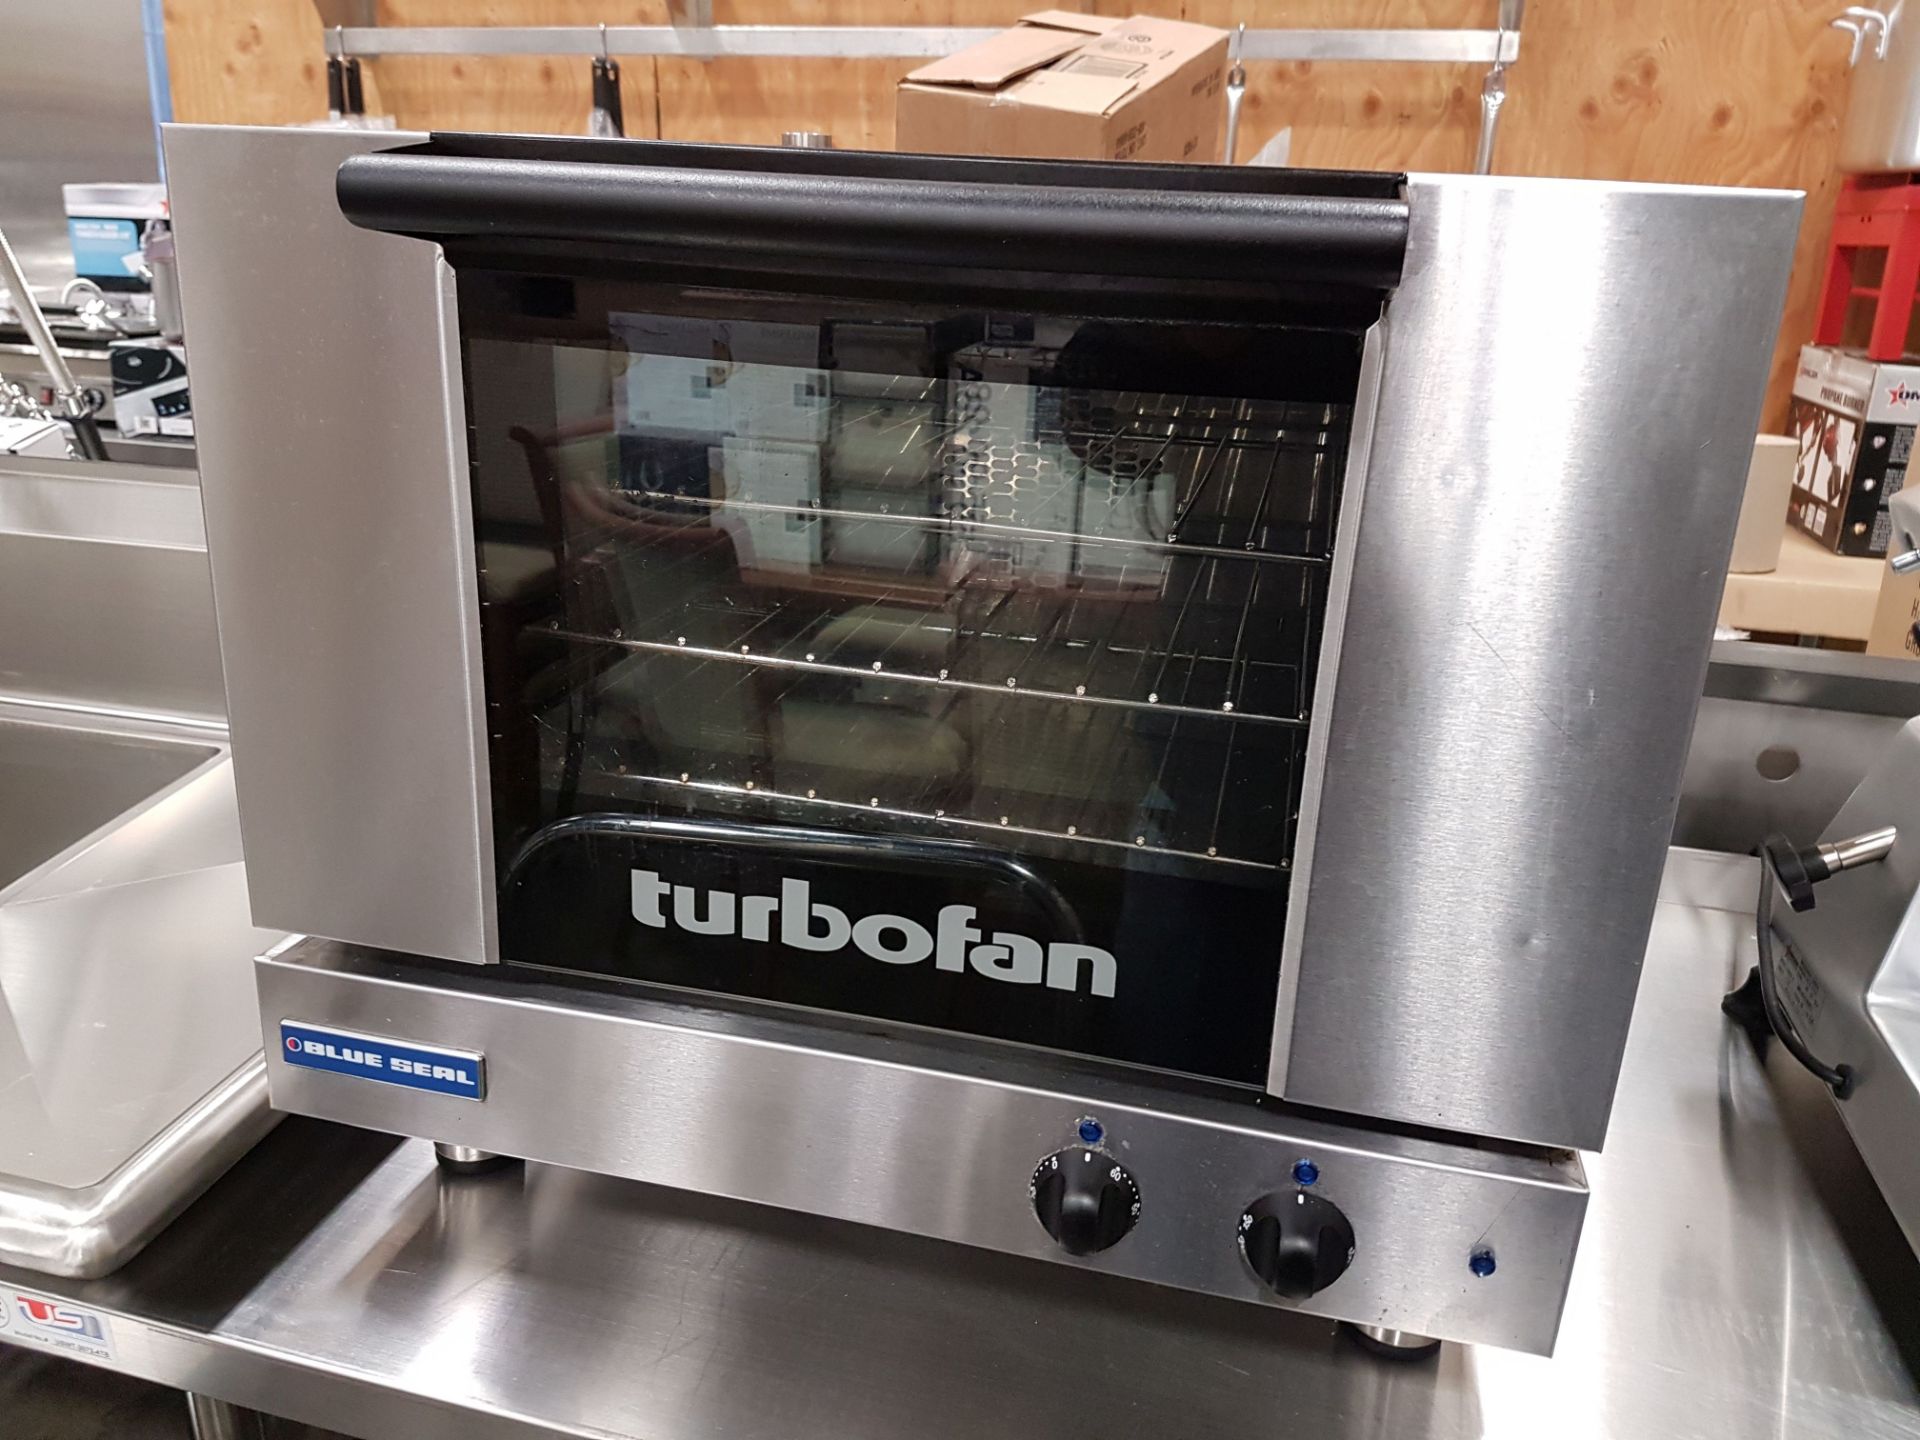 Moffat Turbofan Half-Size Electric Convection Oven - Image 4 of 6